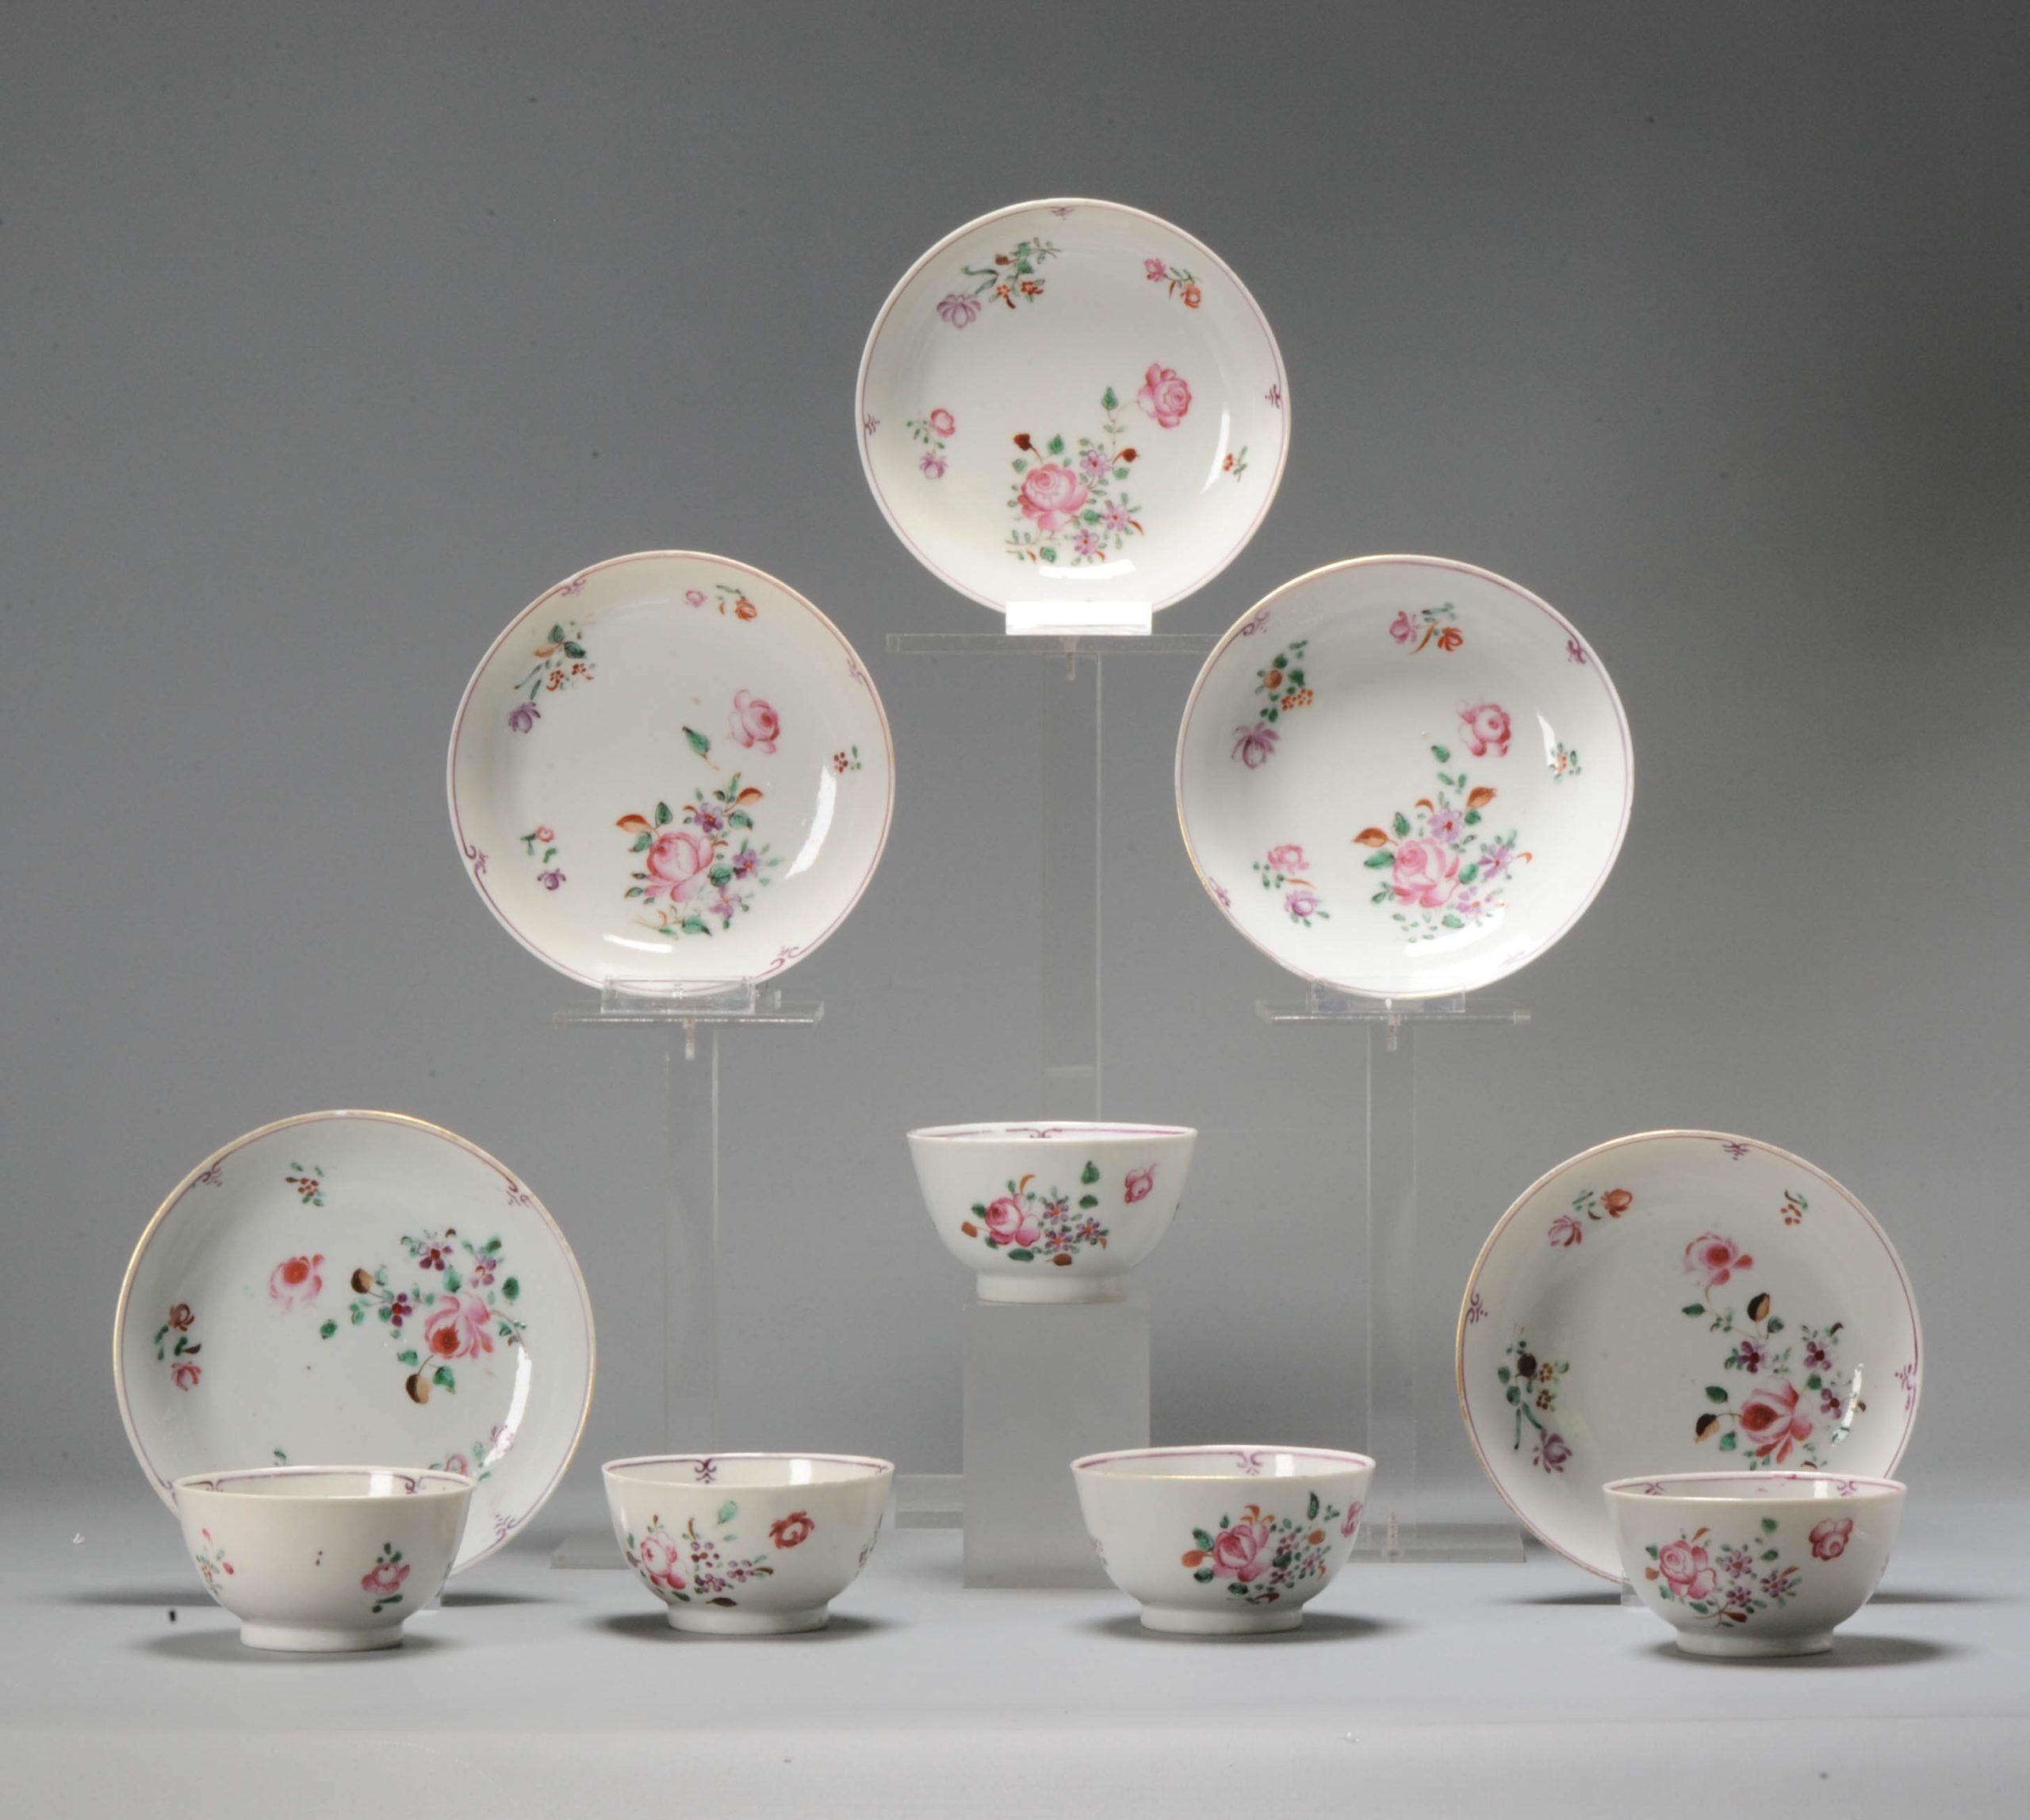 Set of 5 Tea Bowls with Dish Qianlong Period Chinese Porcelain Plates For Sale